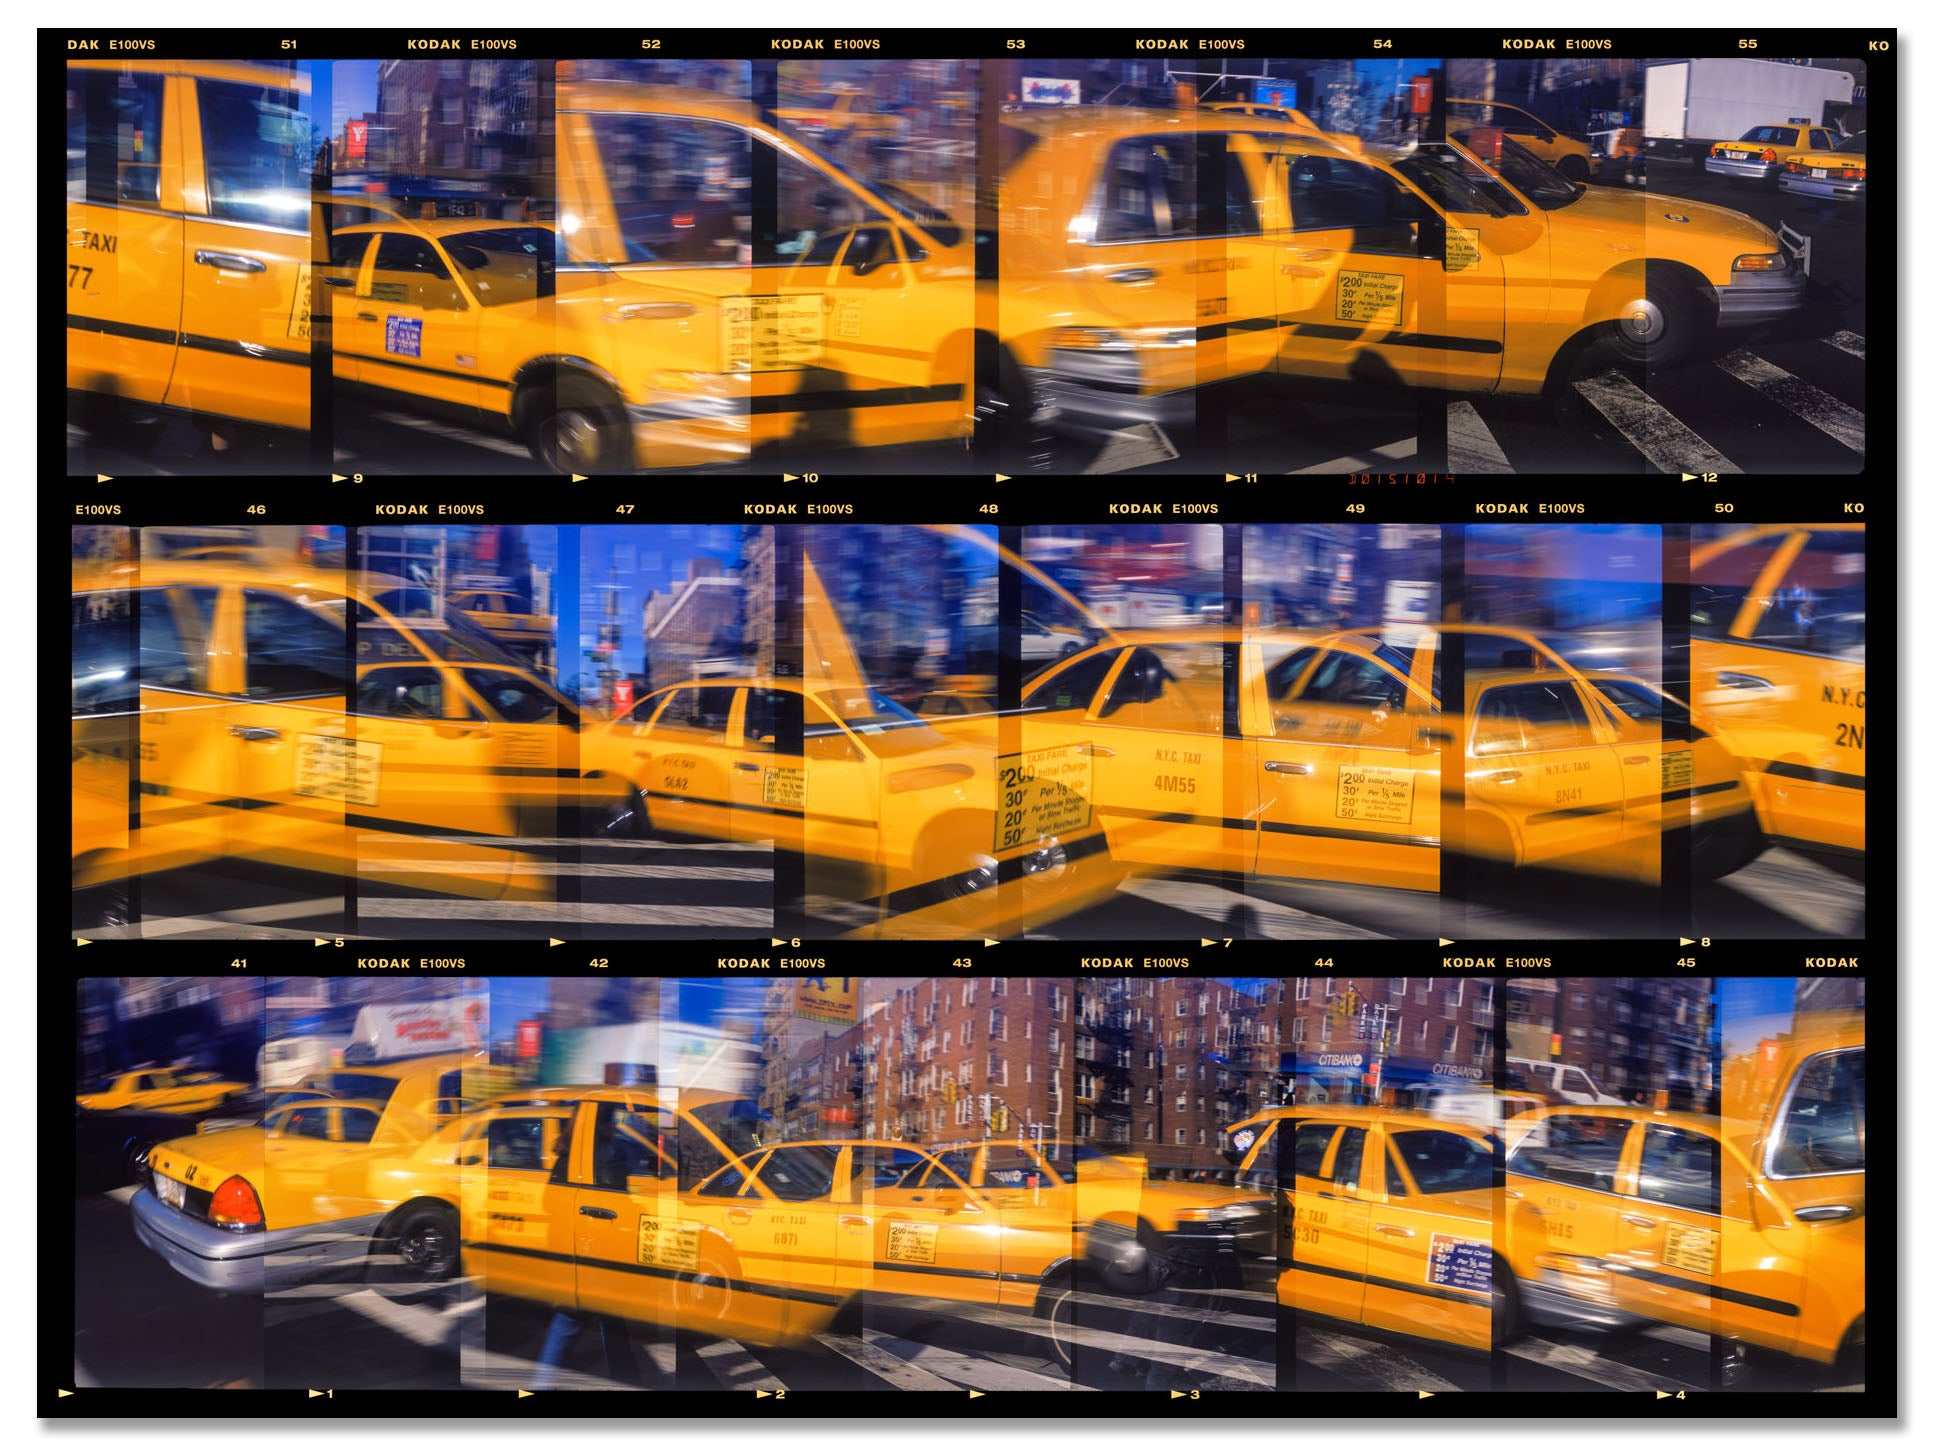 New York Taxis, Corner of 23rd and 6th, 1999